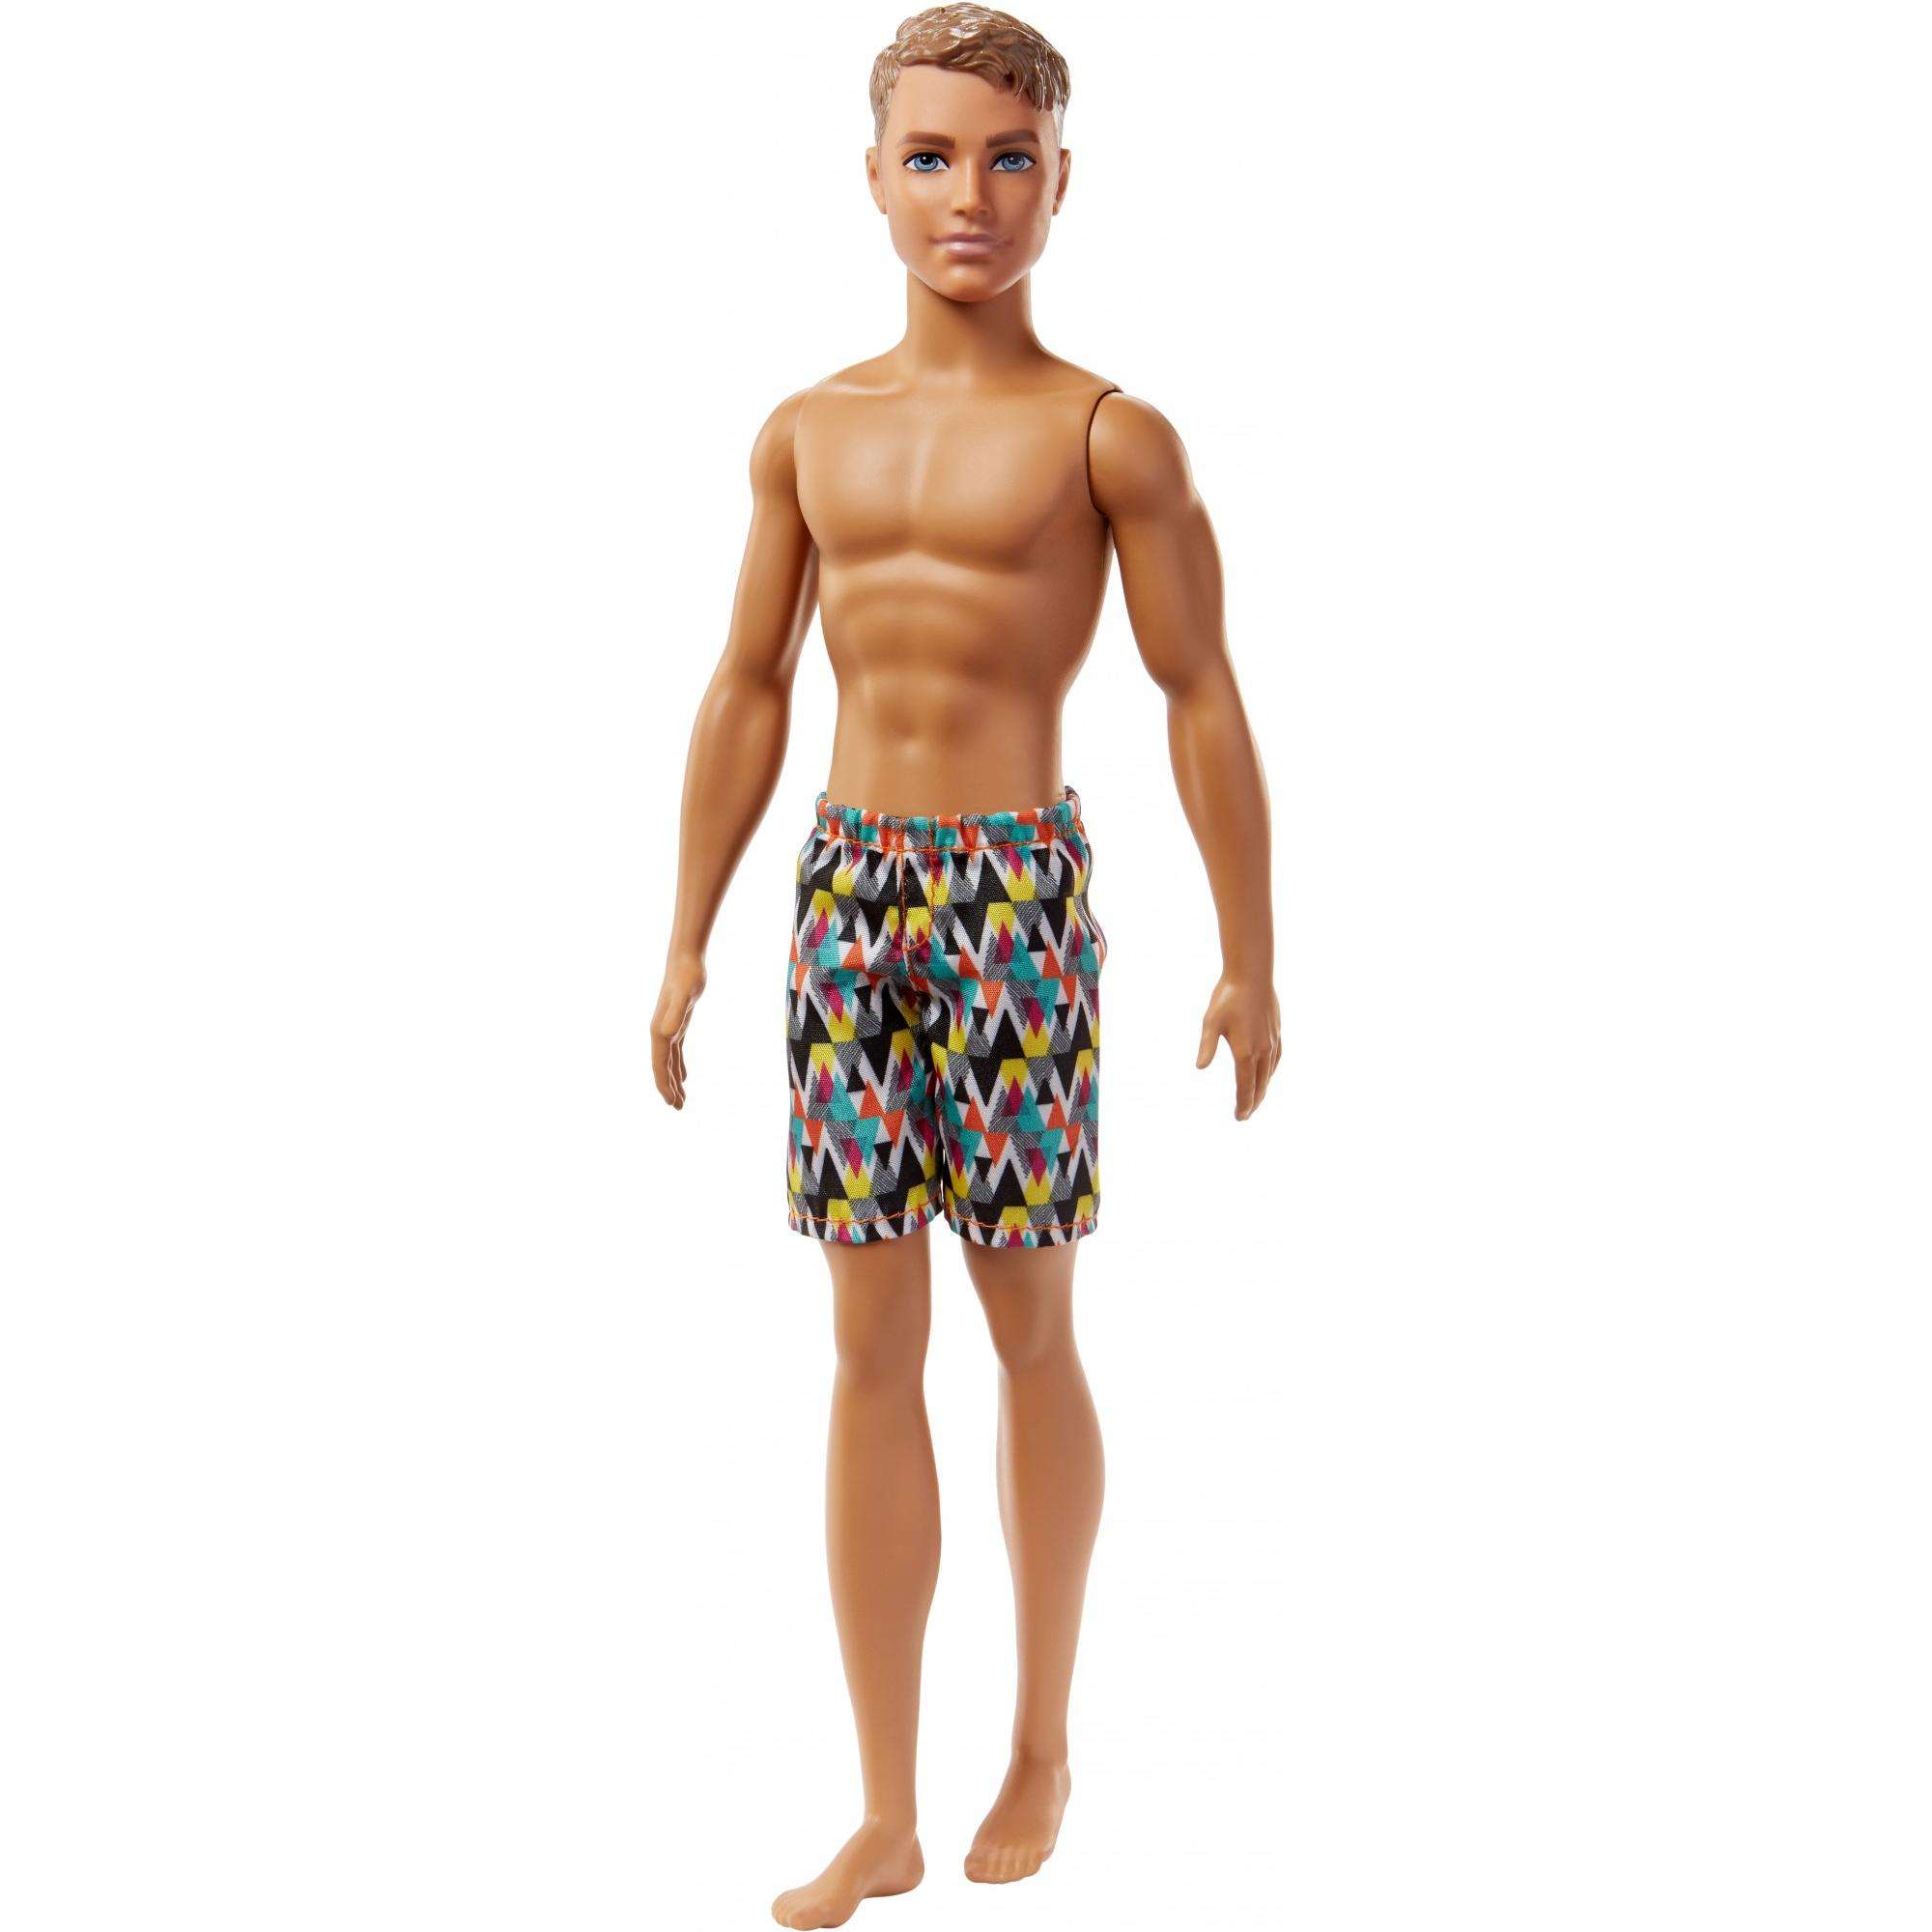 Barbie Ken Beach Doll with Multi-Colored Swimsuit Trunks - image 1 of 4